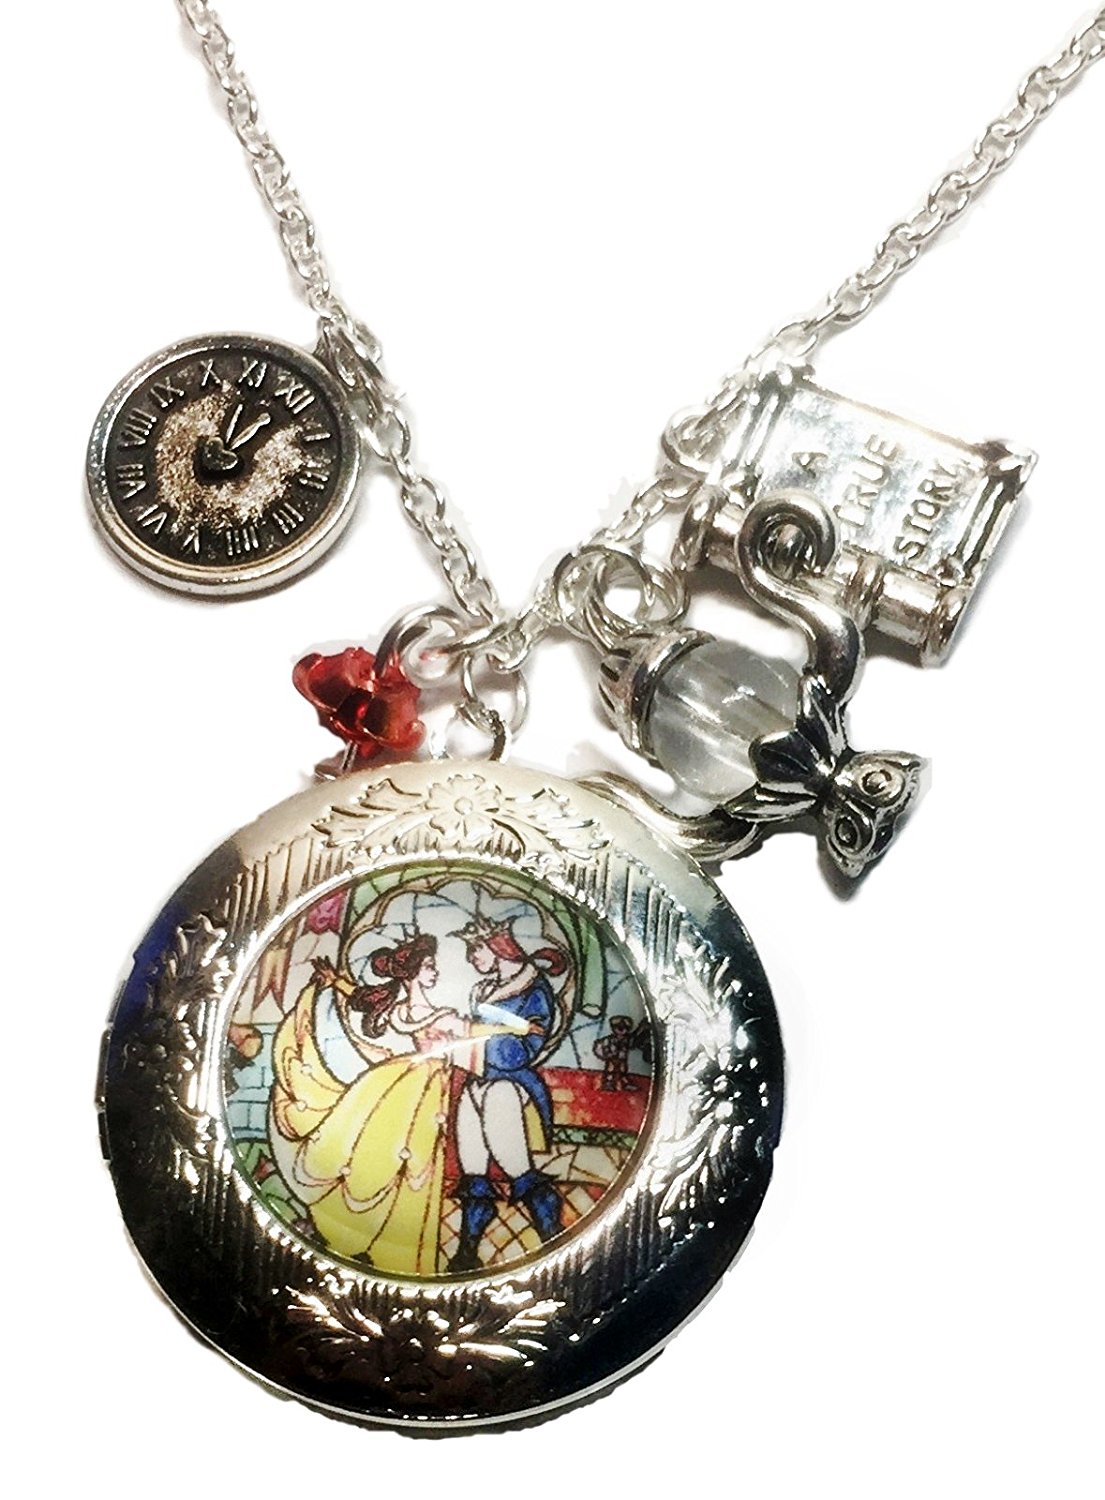 Absolutely Lovely Beauty and the Beast Charm Locket